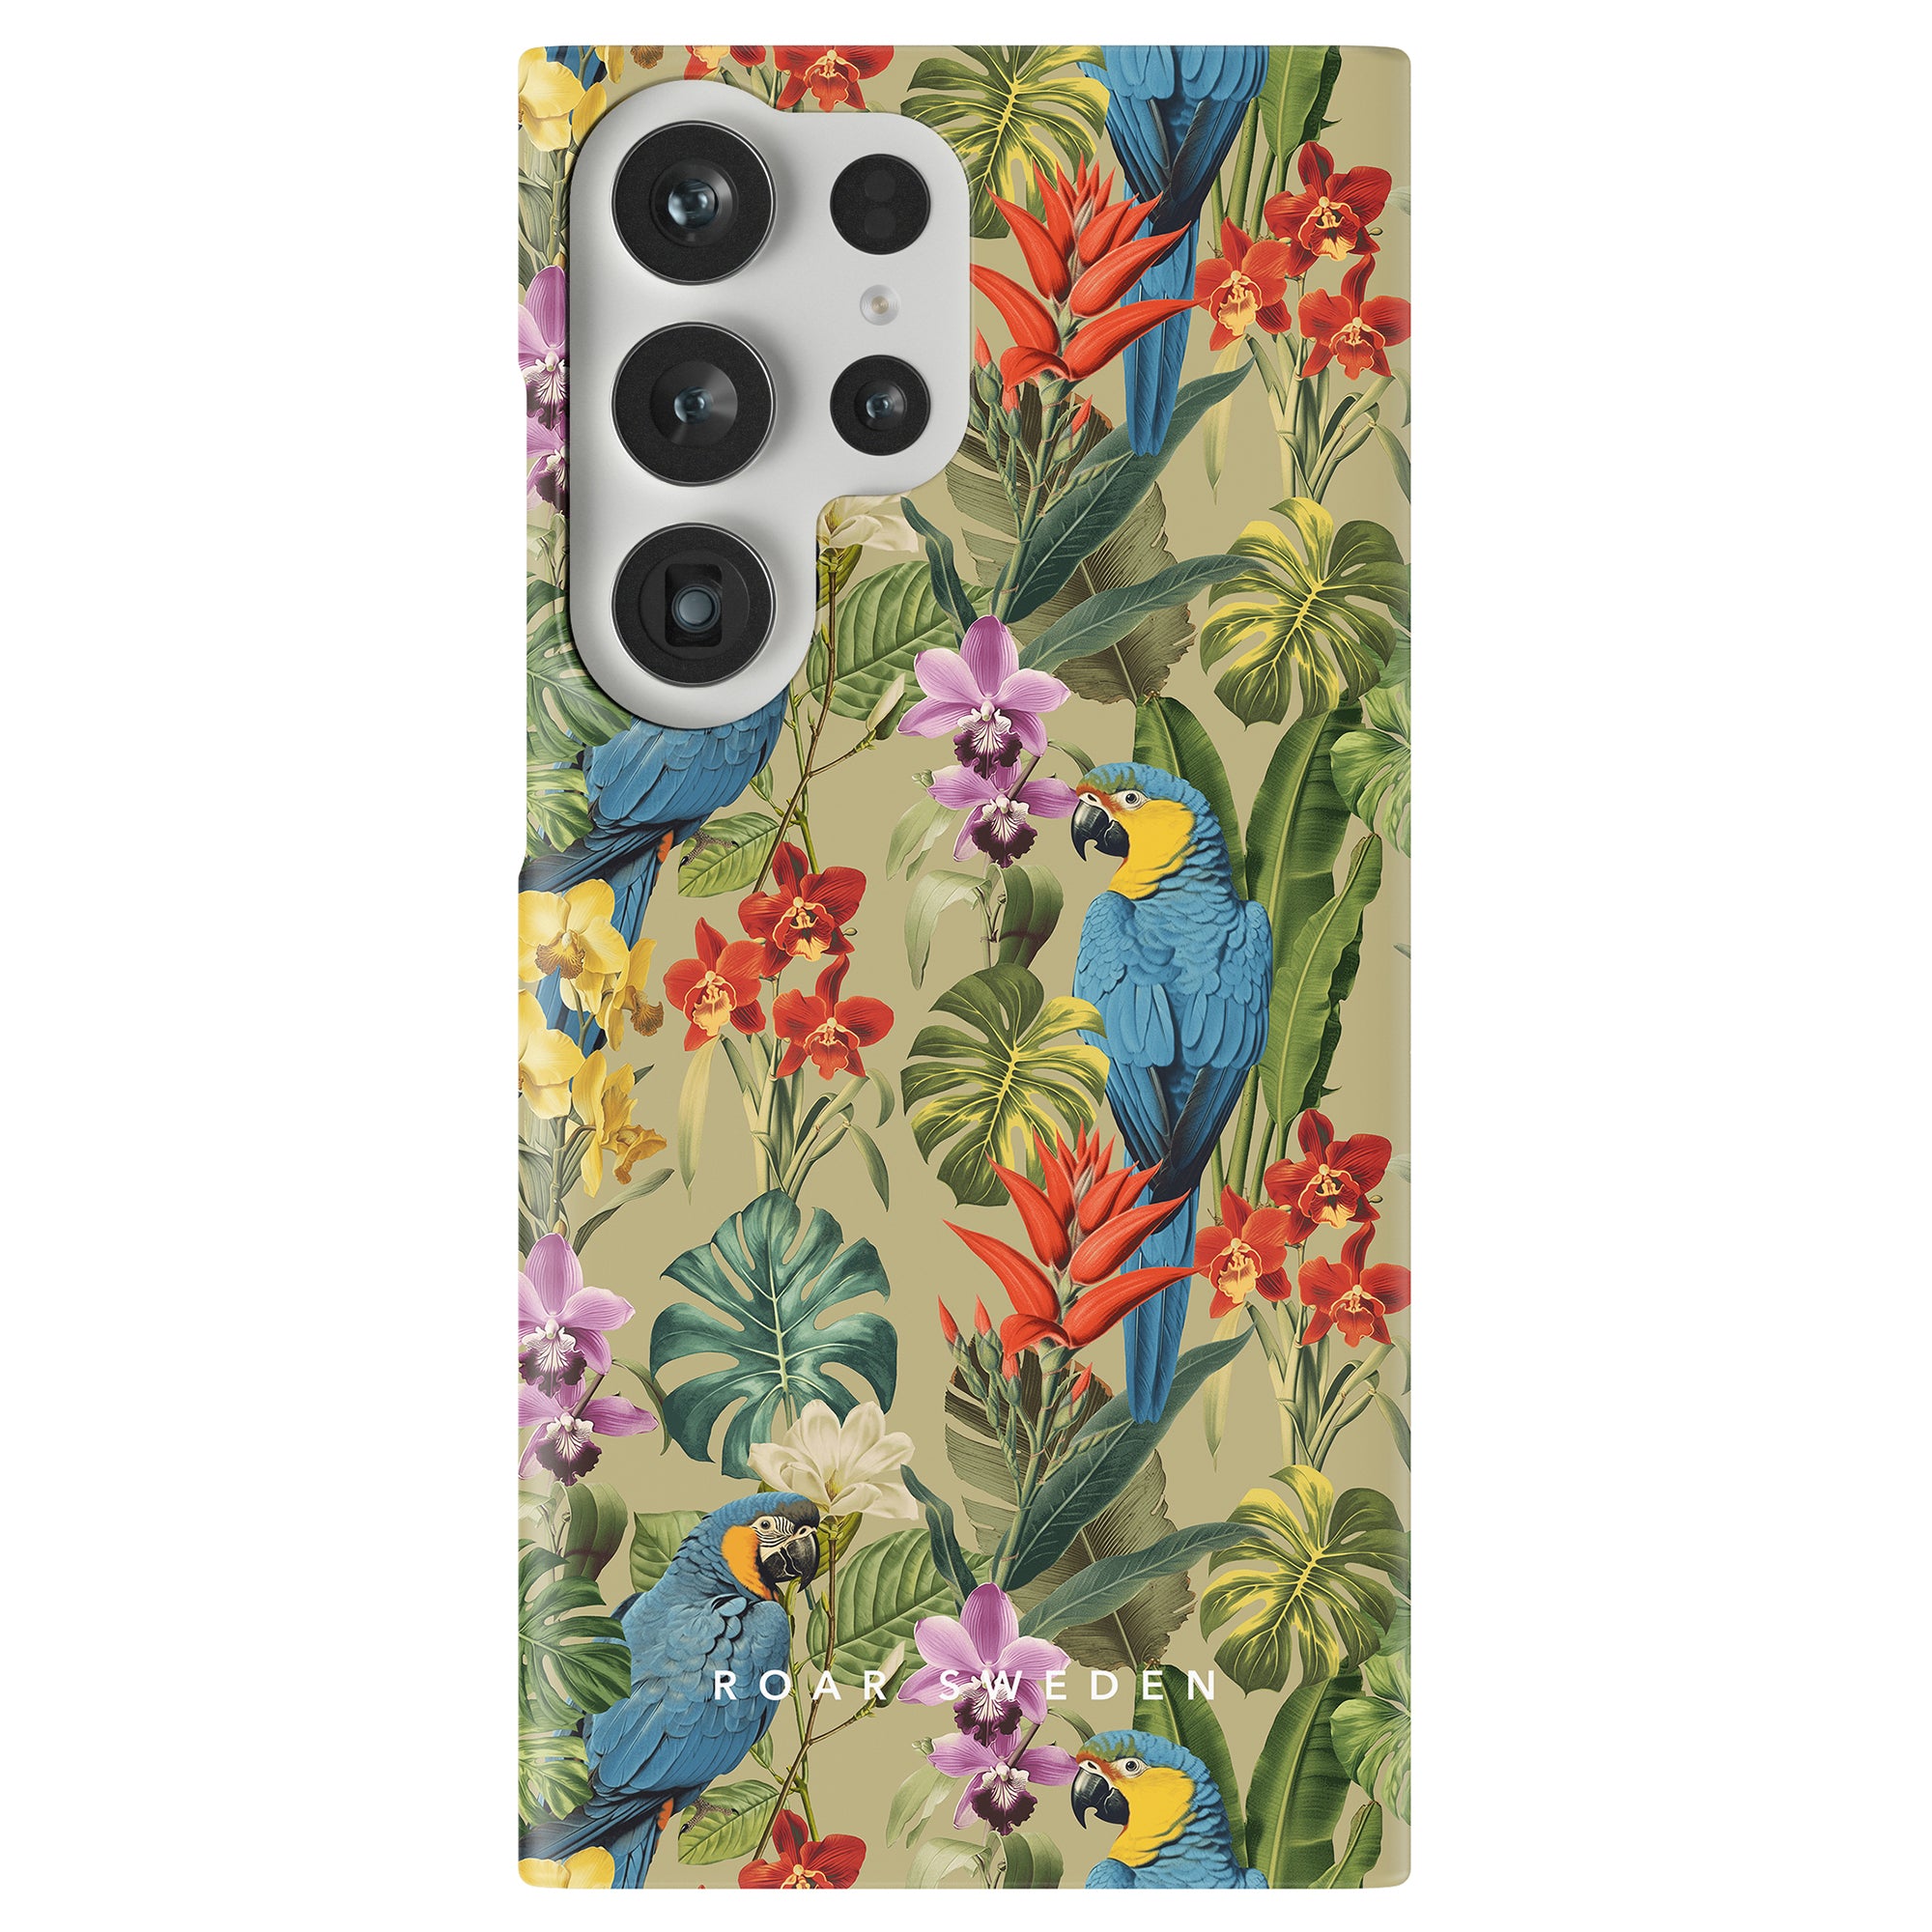 A slim case with a colorful tropical design featuring blue and yellow parrots, green leaves, and red and purple flowers. Part of the "Birds Collection," this Verdant Beauty - Slim case boasts a "Roar Sweden" logo at the bottom.